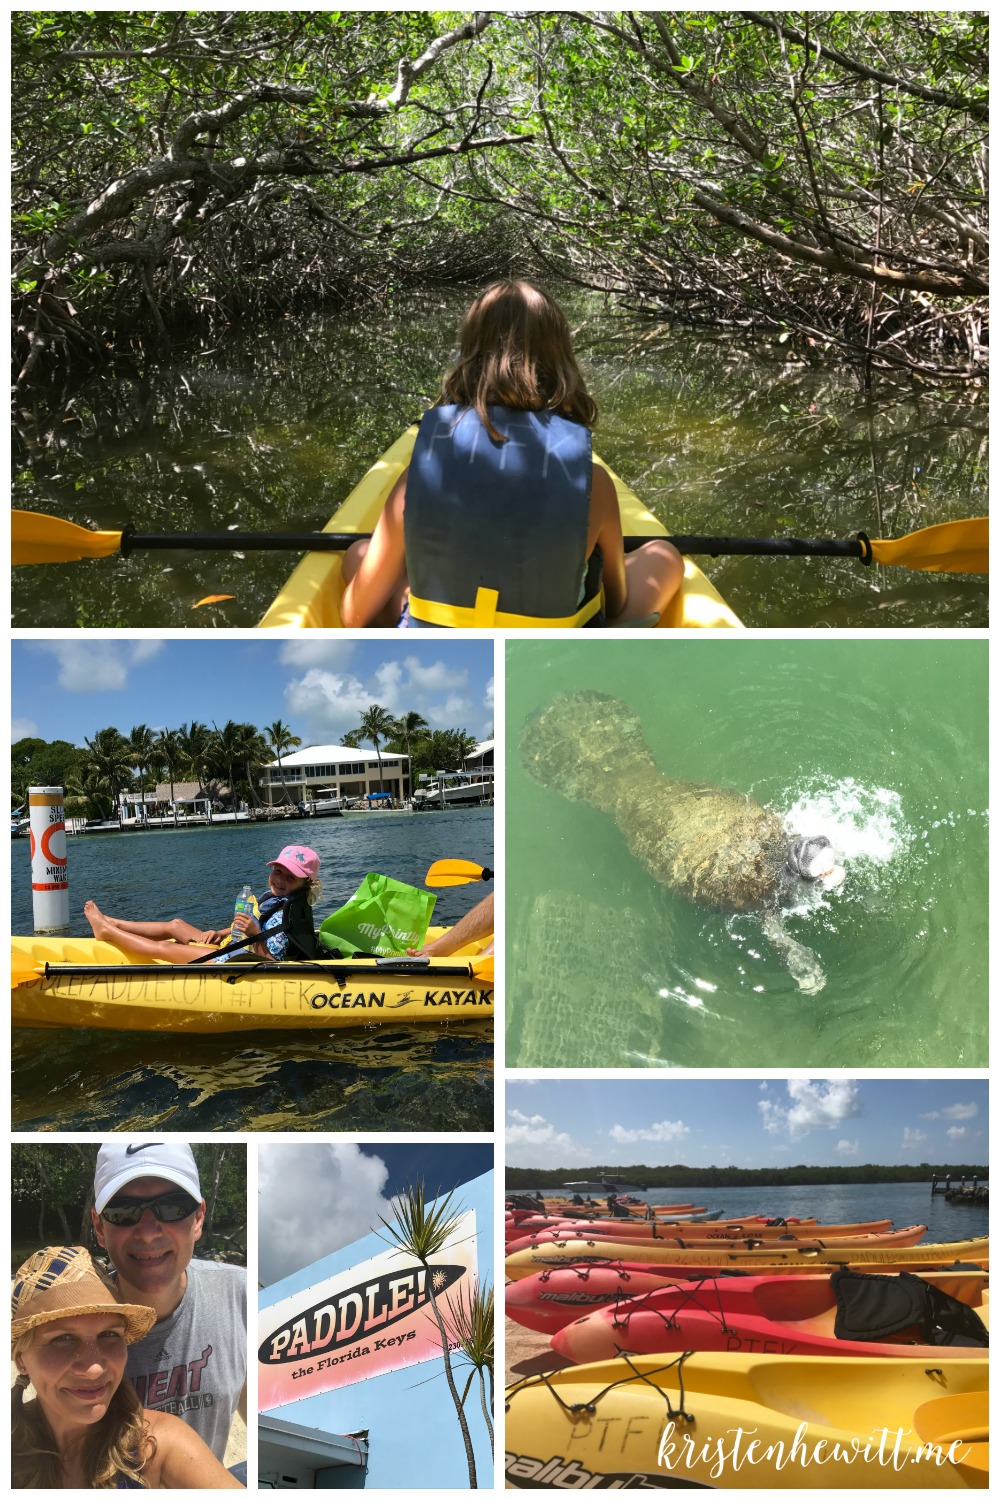 Heading to Key Largo for a long weekend or some family time? Check out the Top 5 things to do in Key Largo with kids! Make real travel fun!